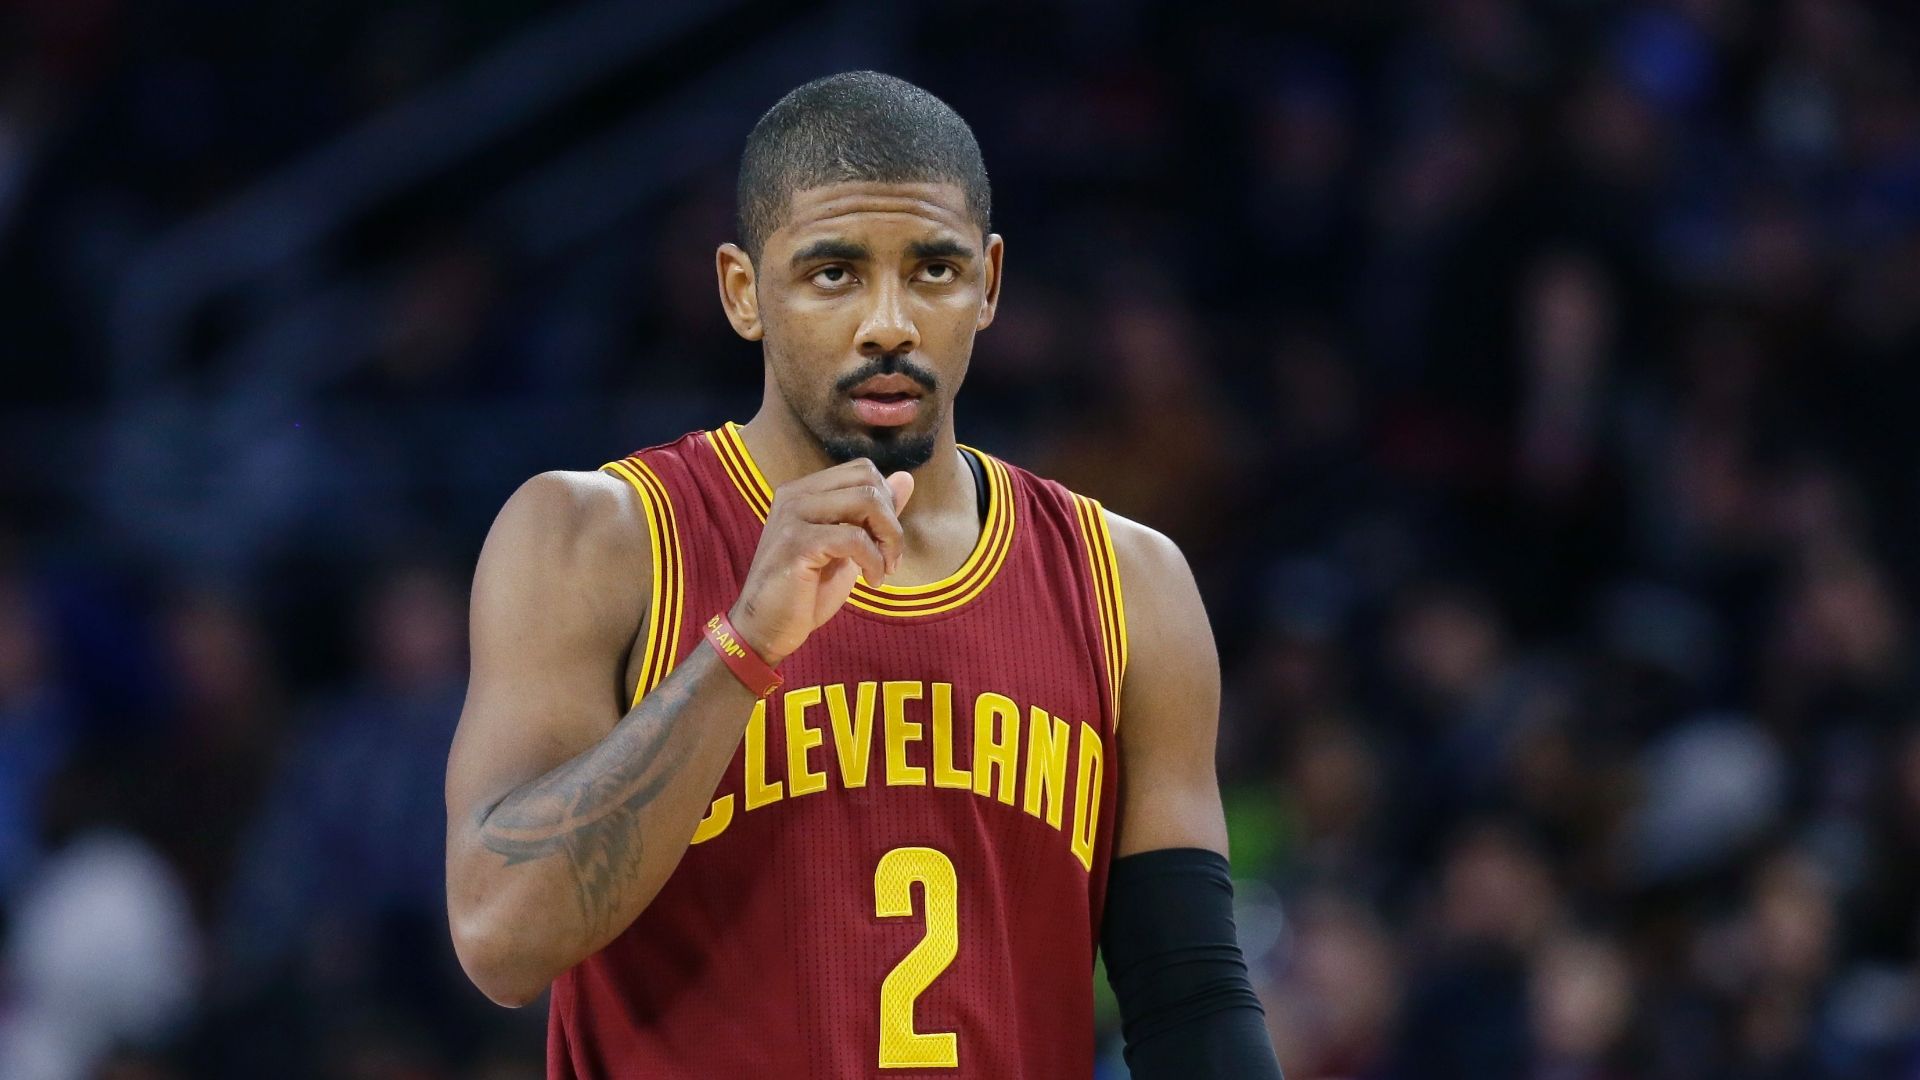 Cavaliers' Kyrie Irving gets apology after being bitten by bed bugs1920 x 1080